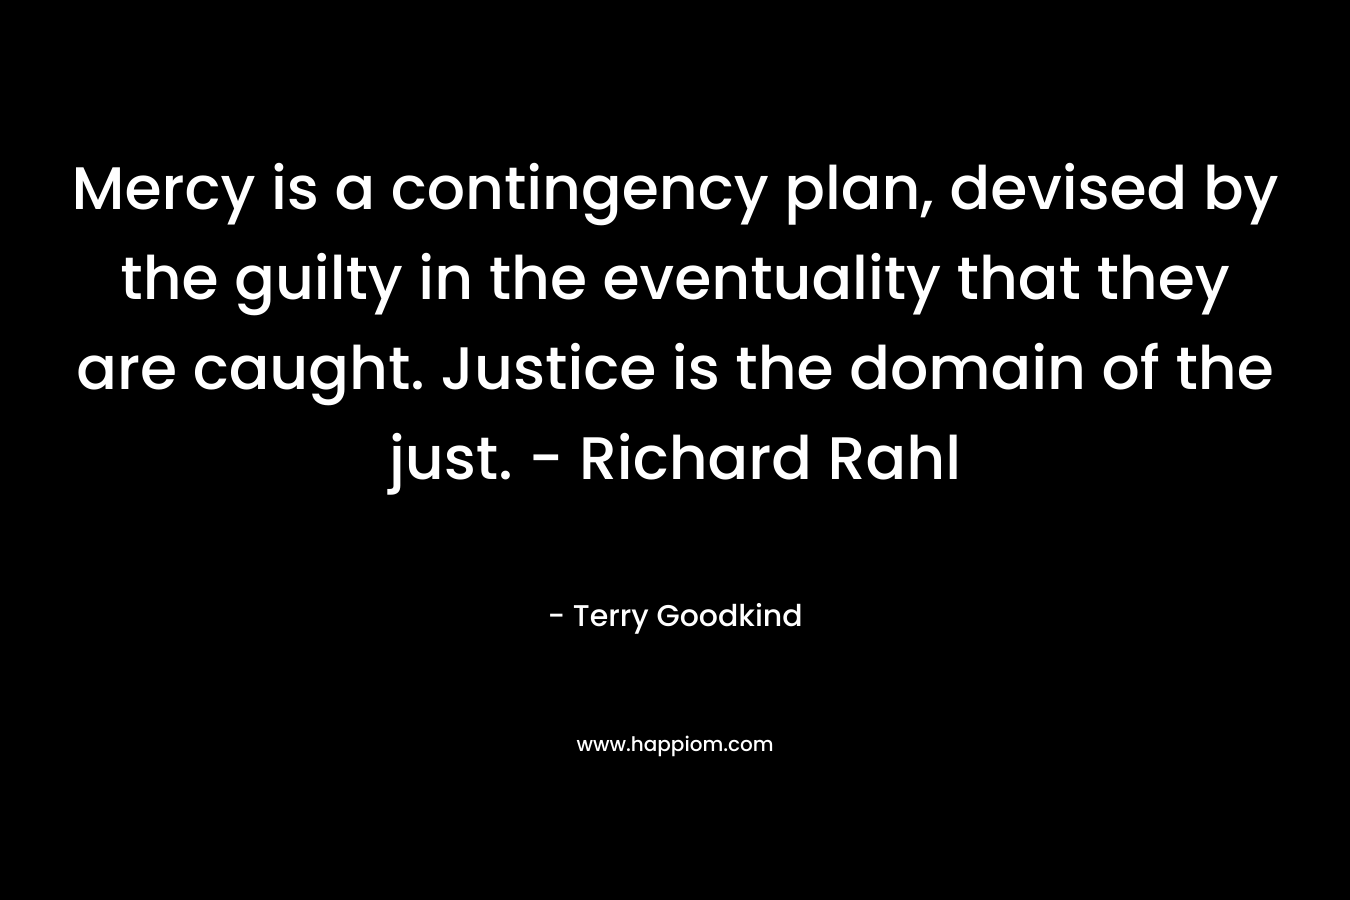 Mercy is a contingency plan, devised by the guilty in the eventuality that they are caught. Justice is the domain of the just. - Richard Rahl